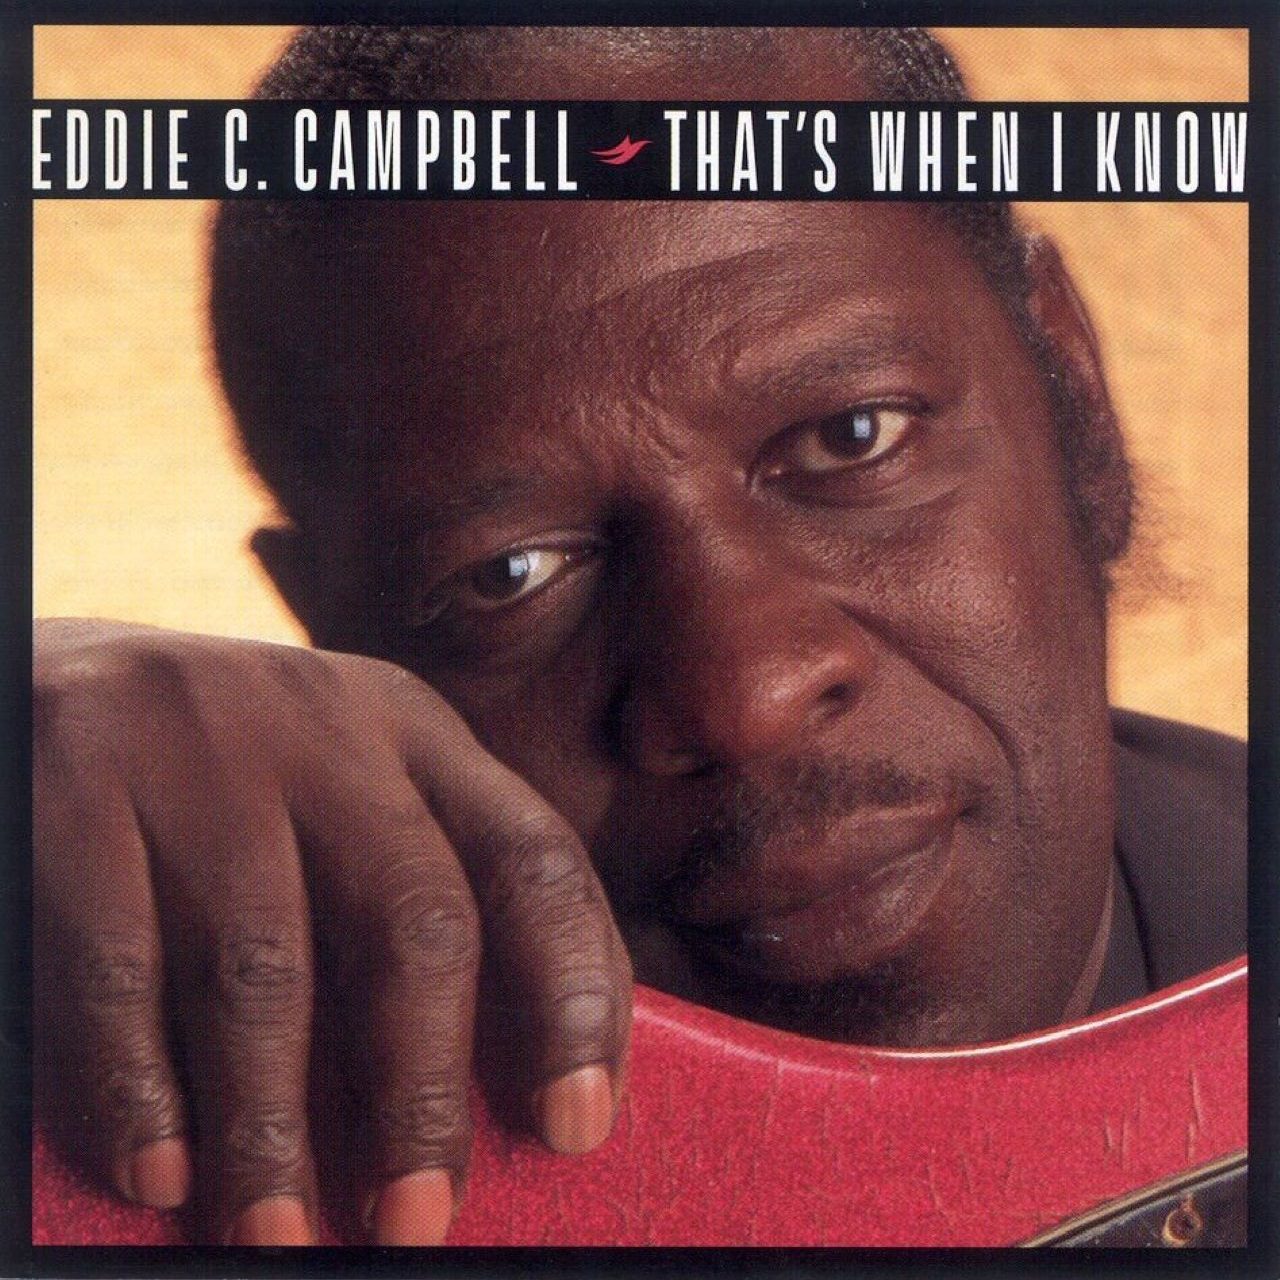 Eddie C. Campbell – That’s When I Know cover album